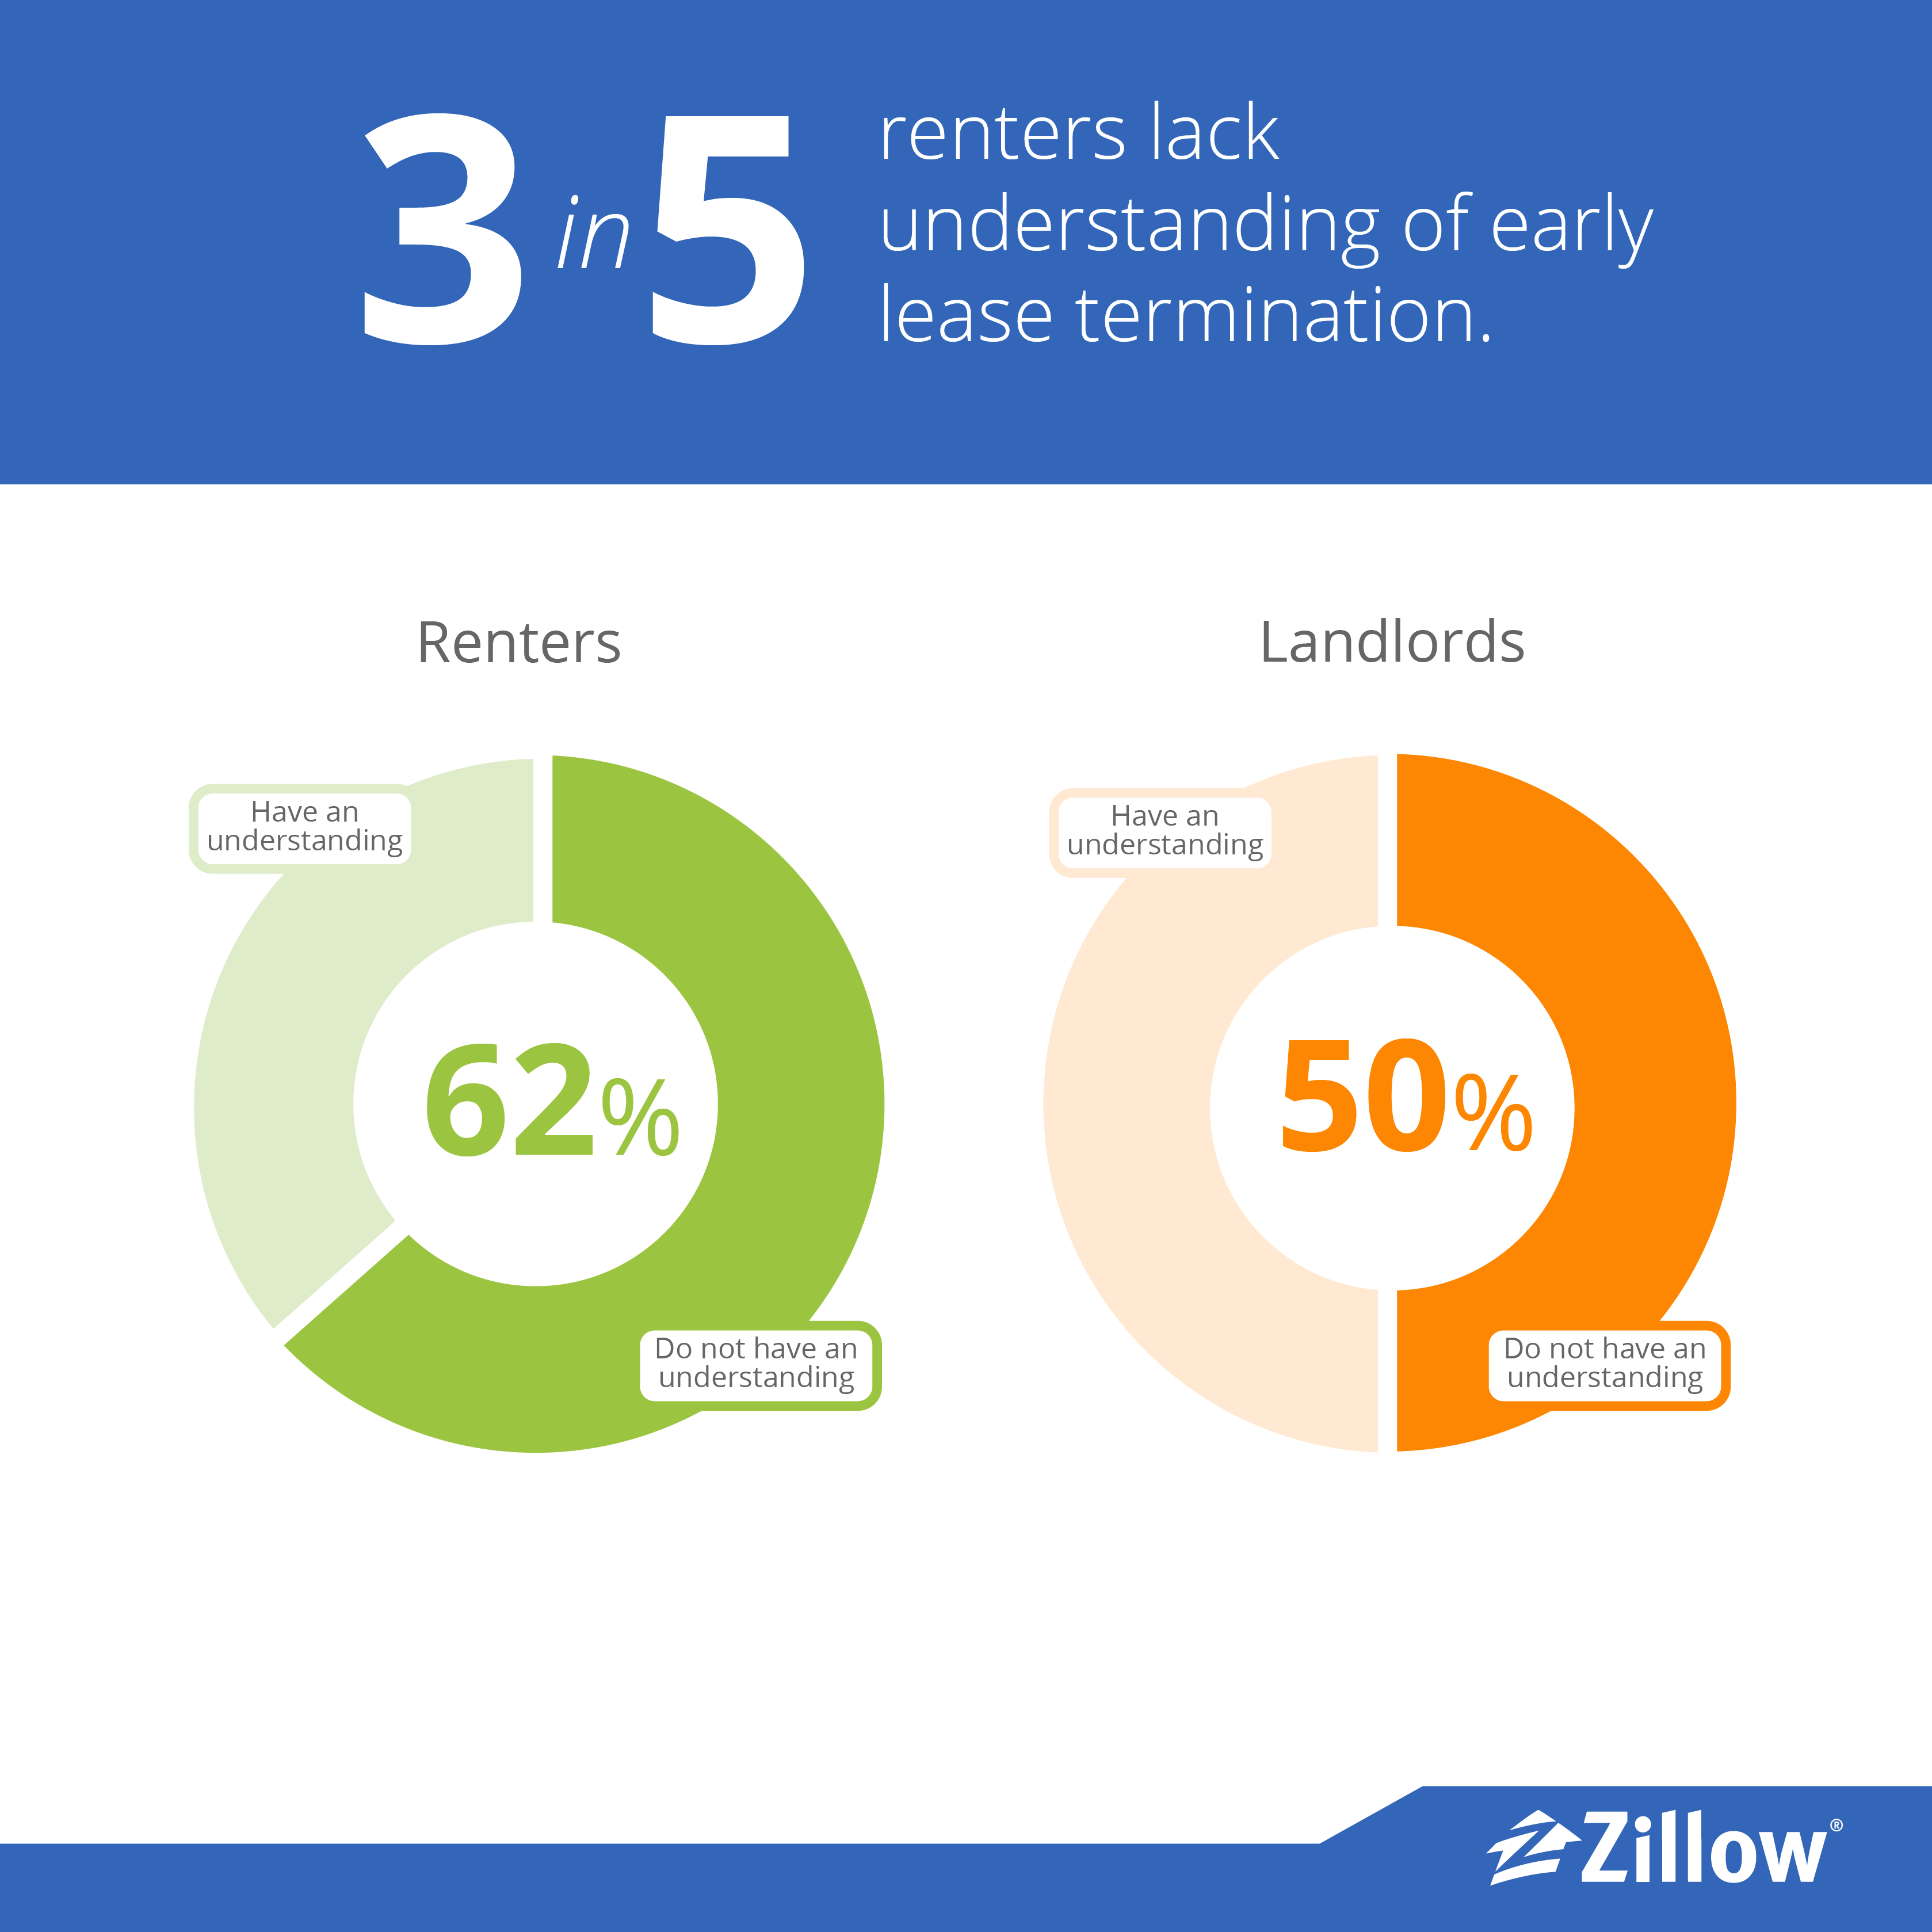 3 in 5 renters lack understanding of laws on early lease termination